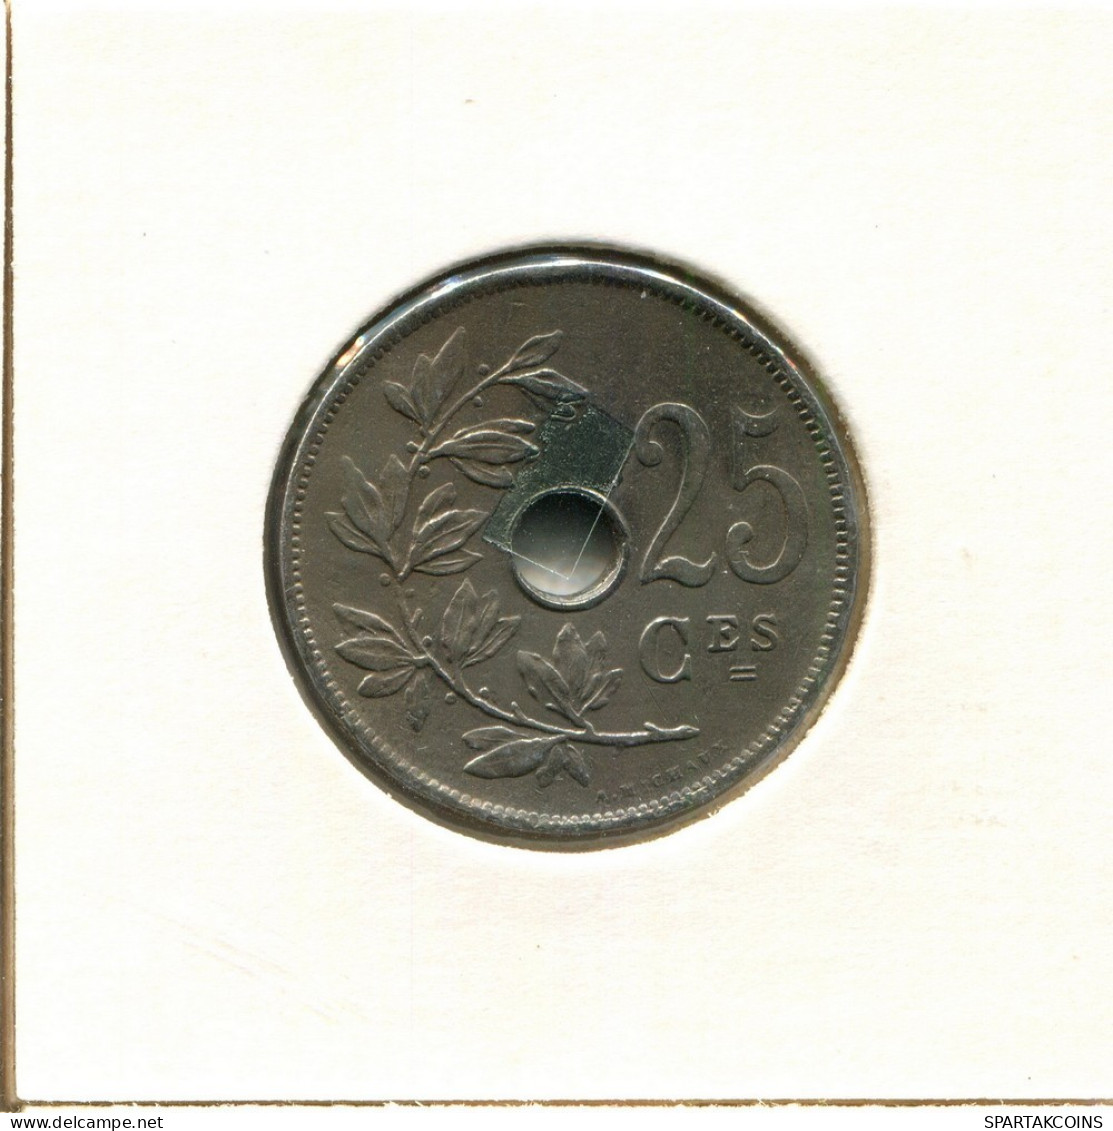 25 CENTIMES 1929 FRENCH Text BELGIUM Coin #BB263.U.A - 25 Cent